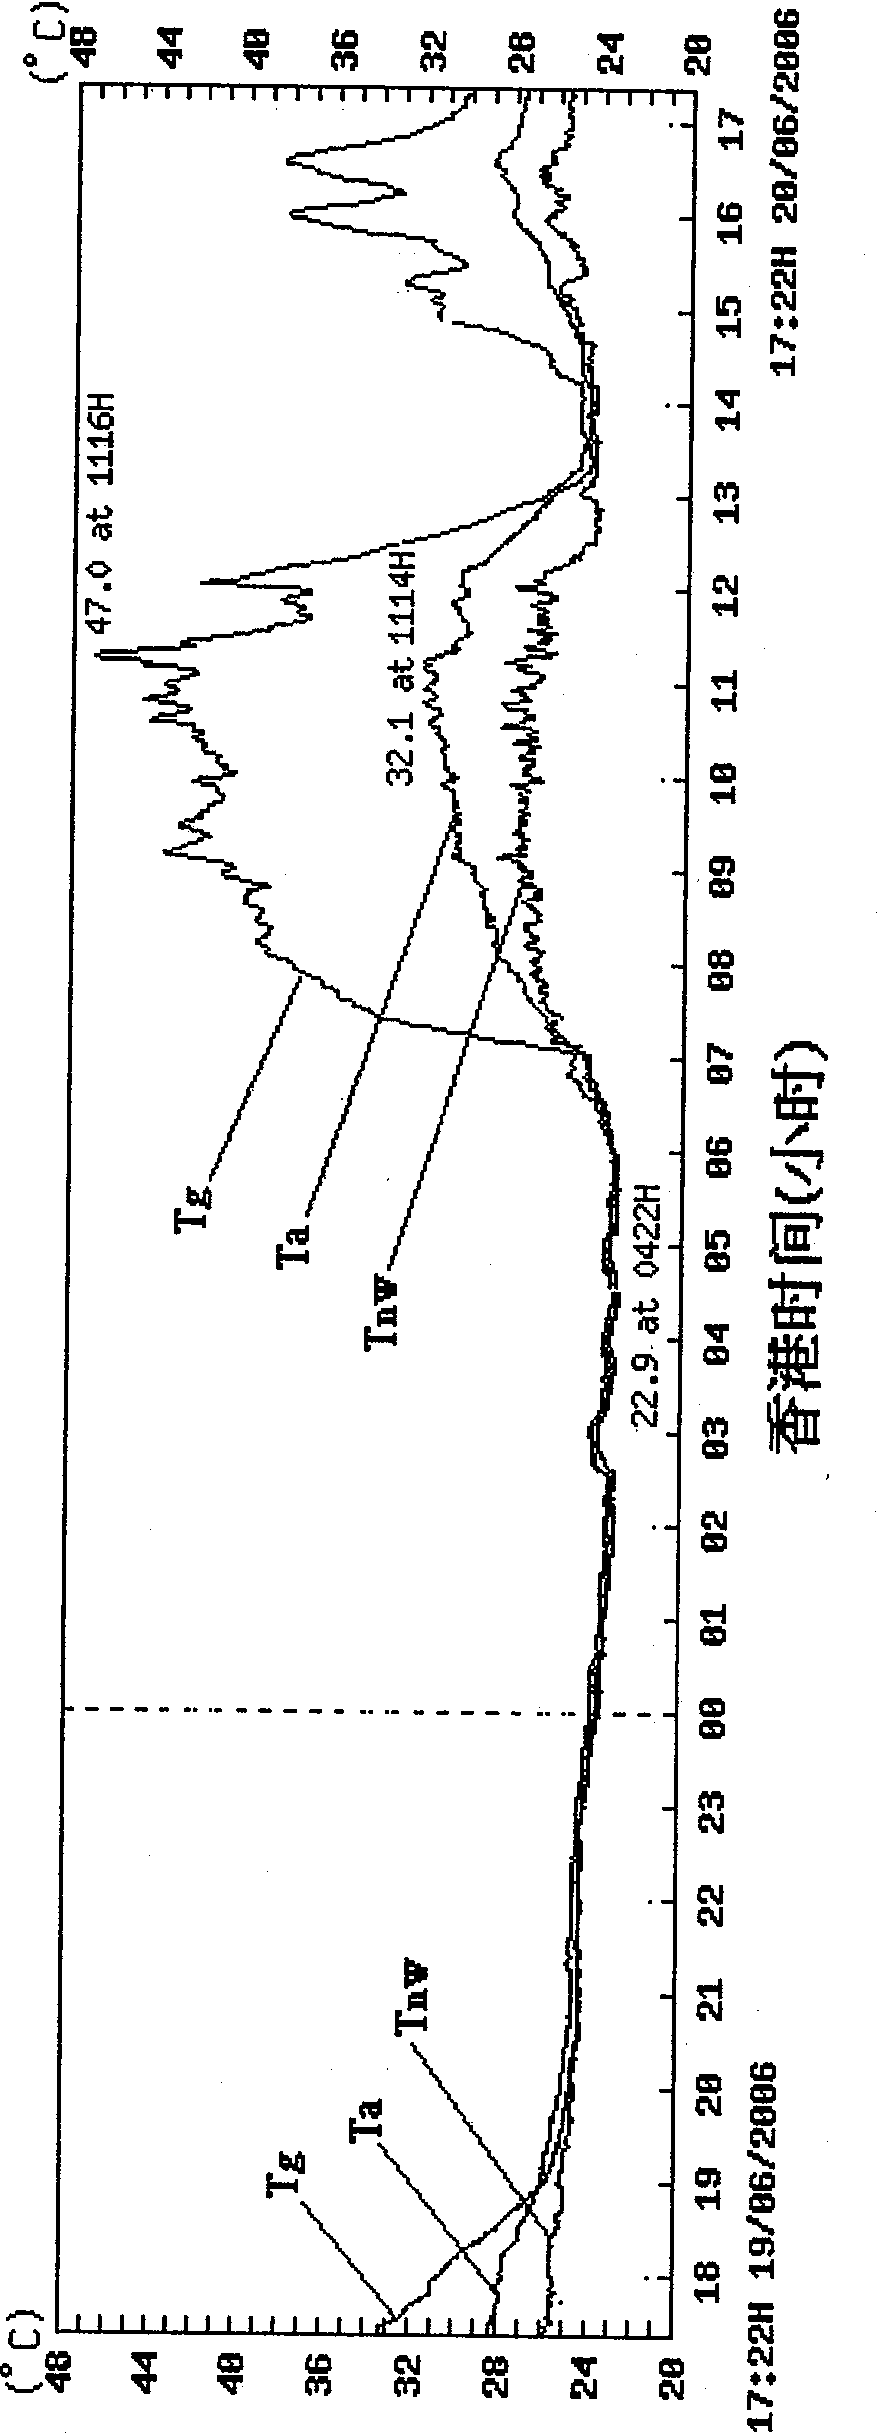 Heat stress monitoring system and field apparatus thereof